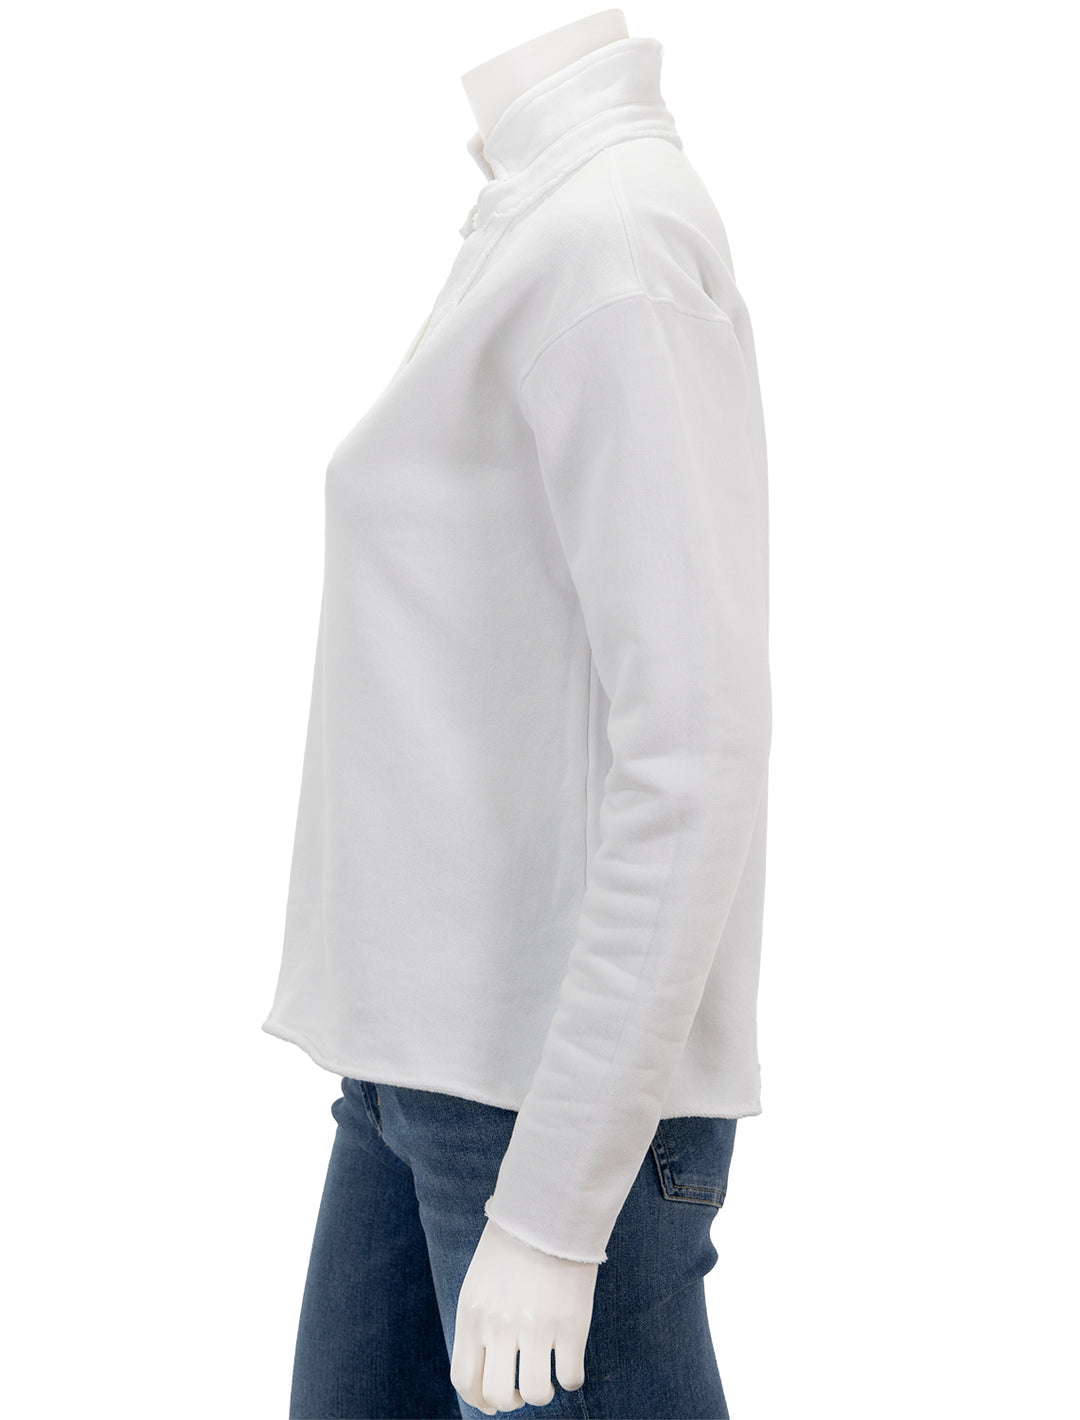 Side view of Frank & Eileen's patrick popover henley in white.